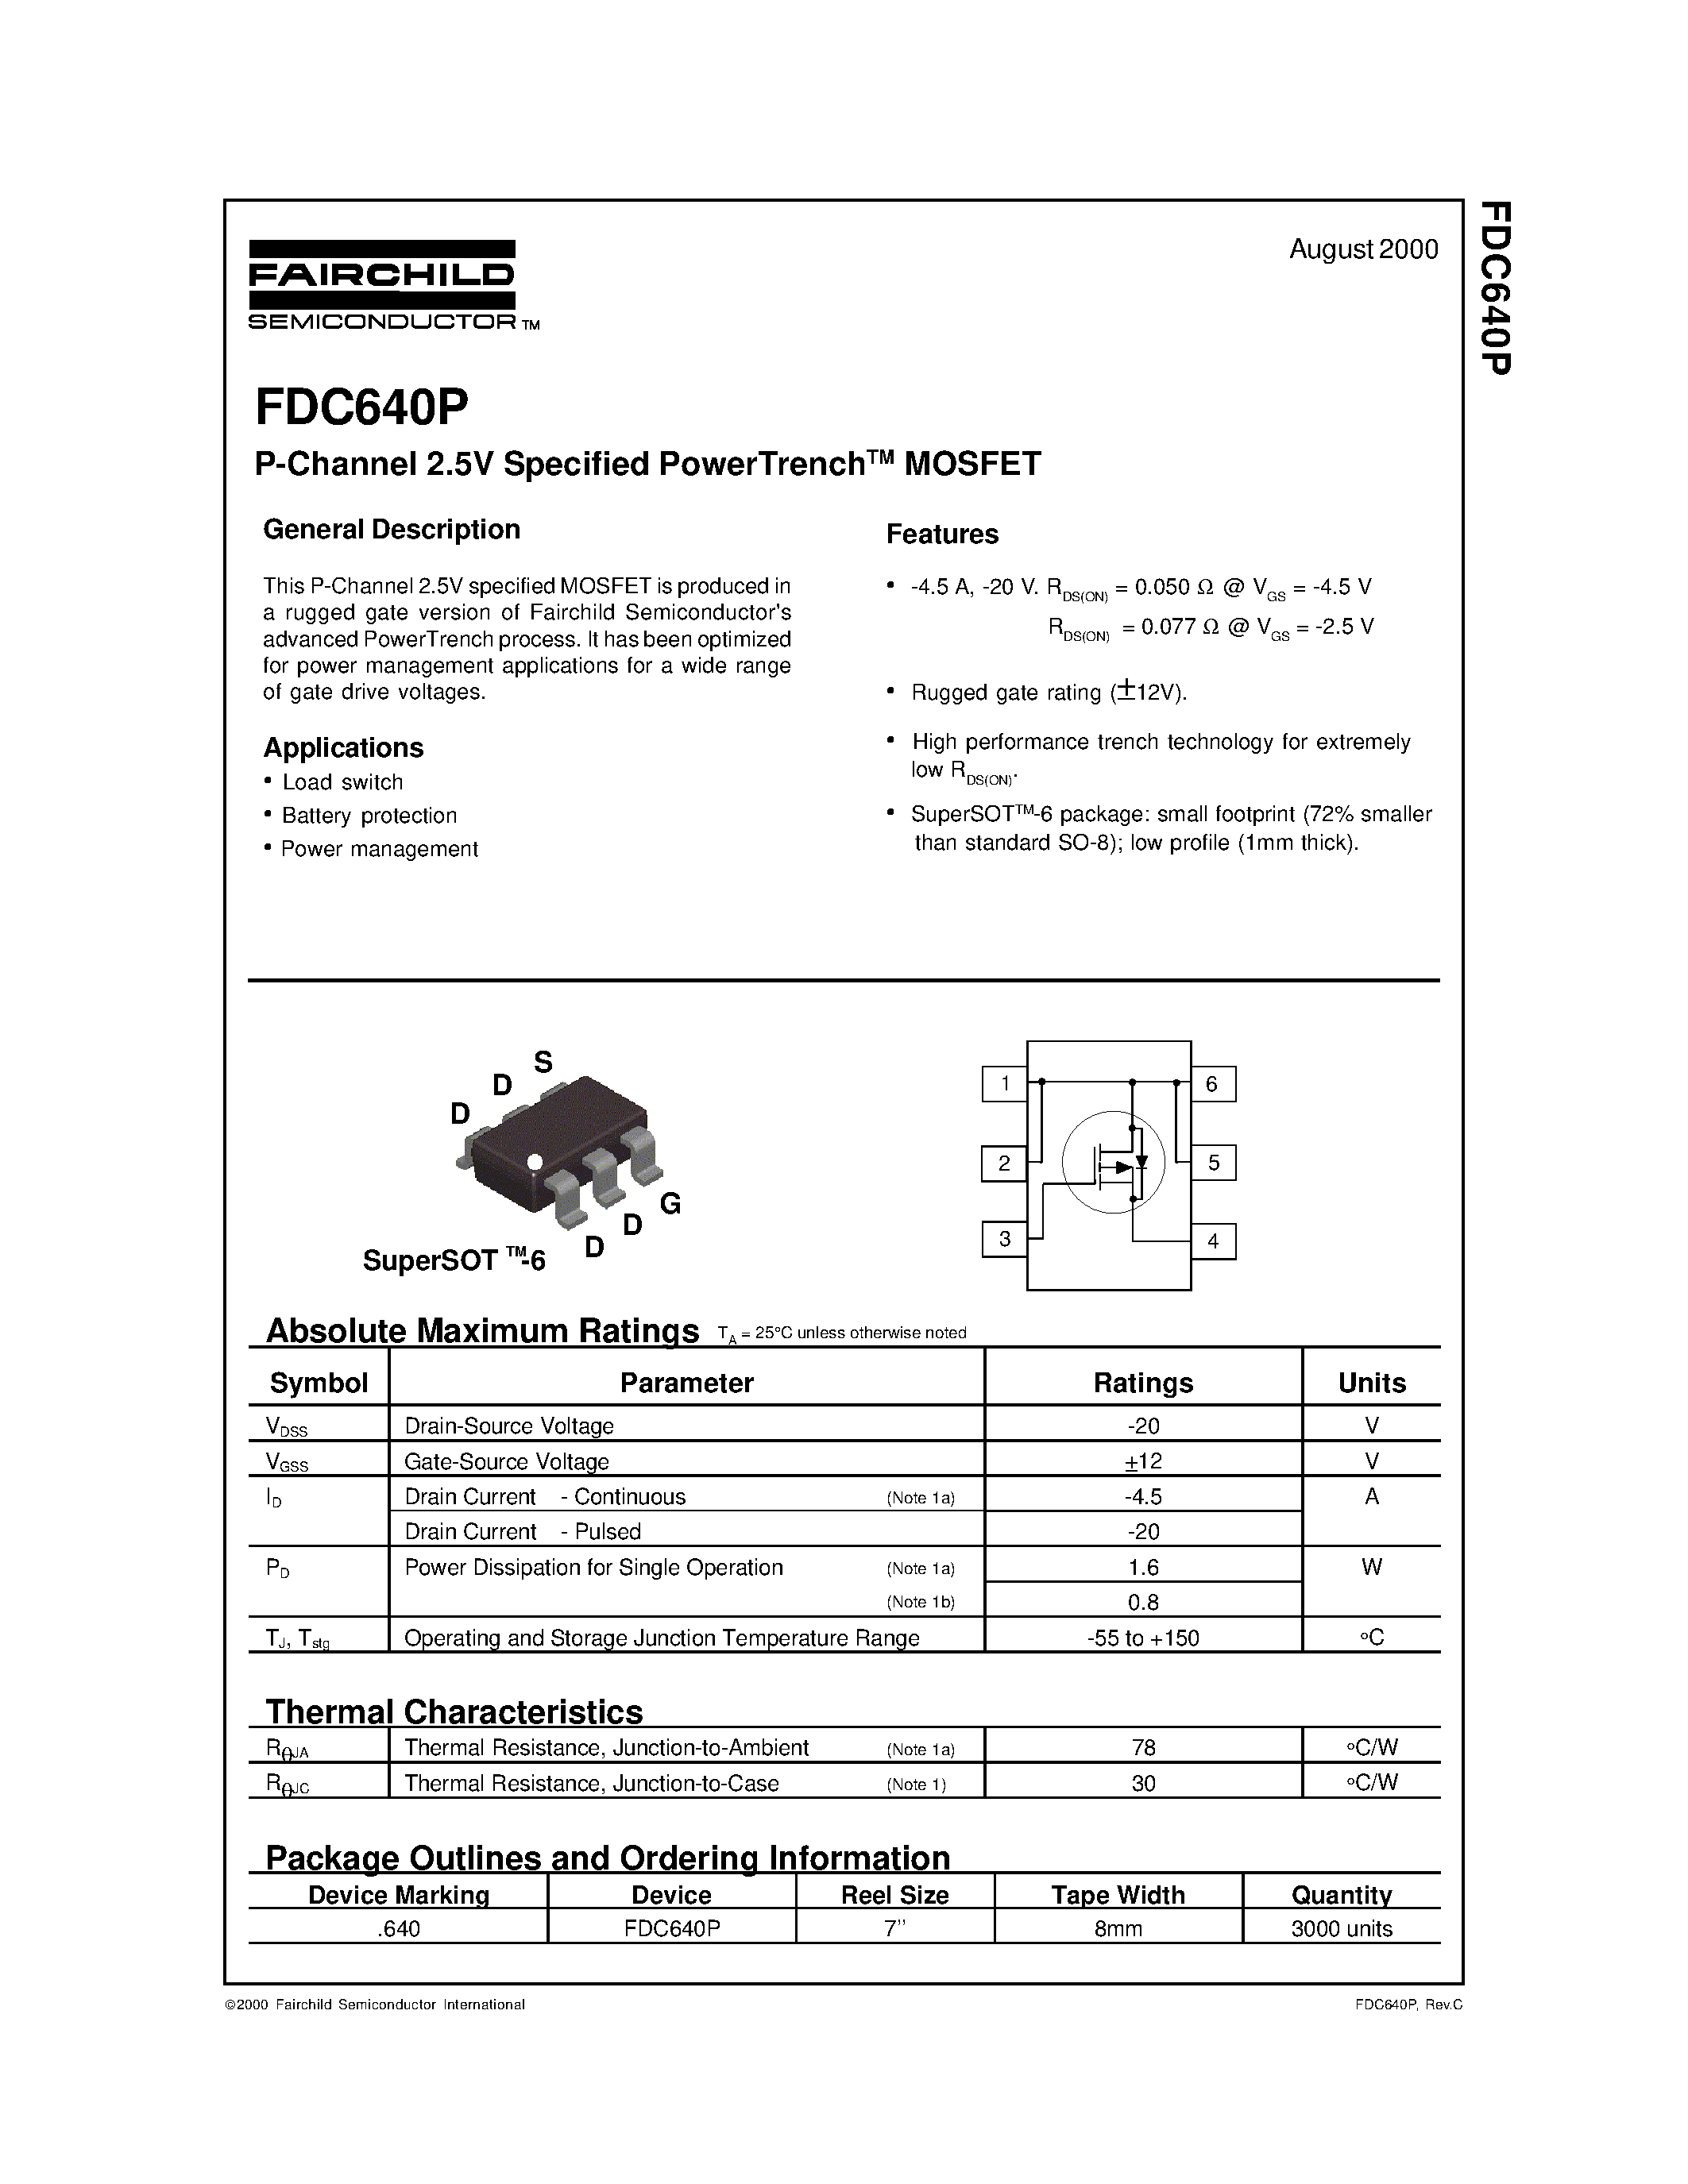 Datasheet FDC640P - P-Channel 2.5V Specified PowerTrenchTM MOSFET page 1